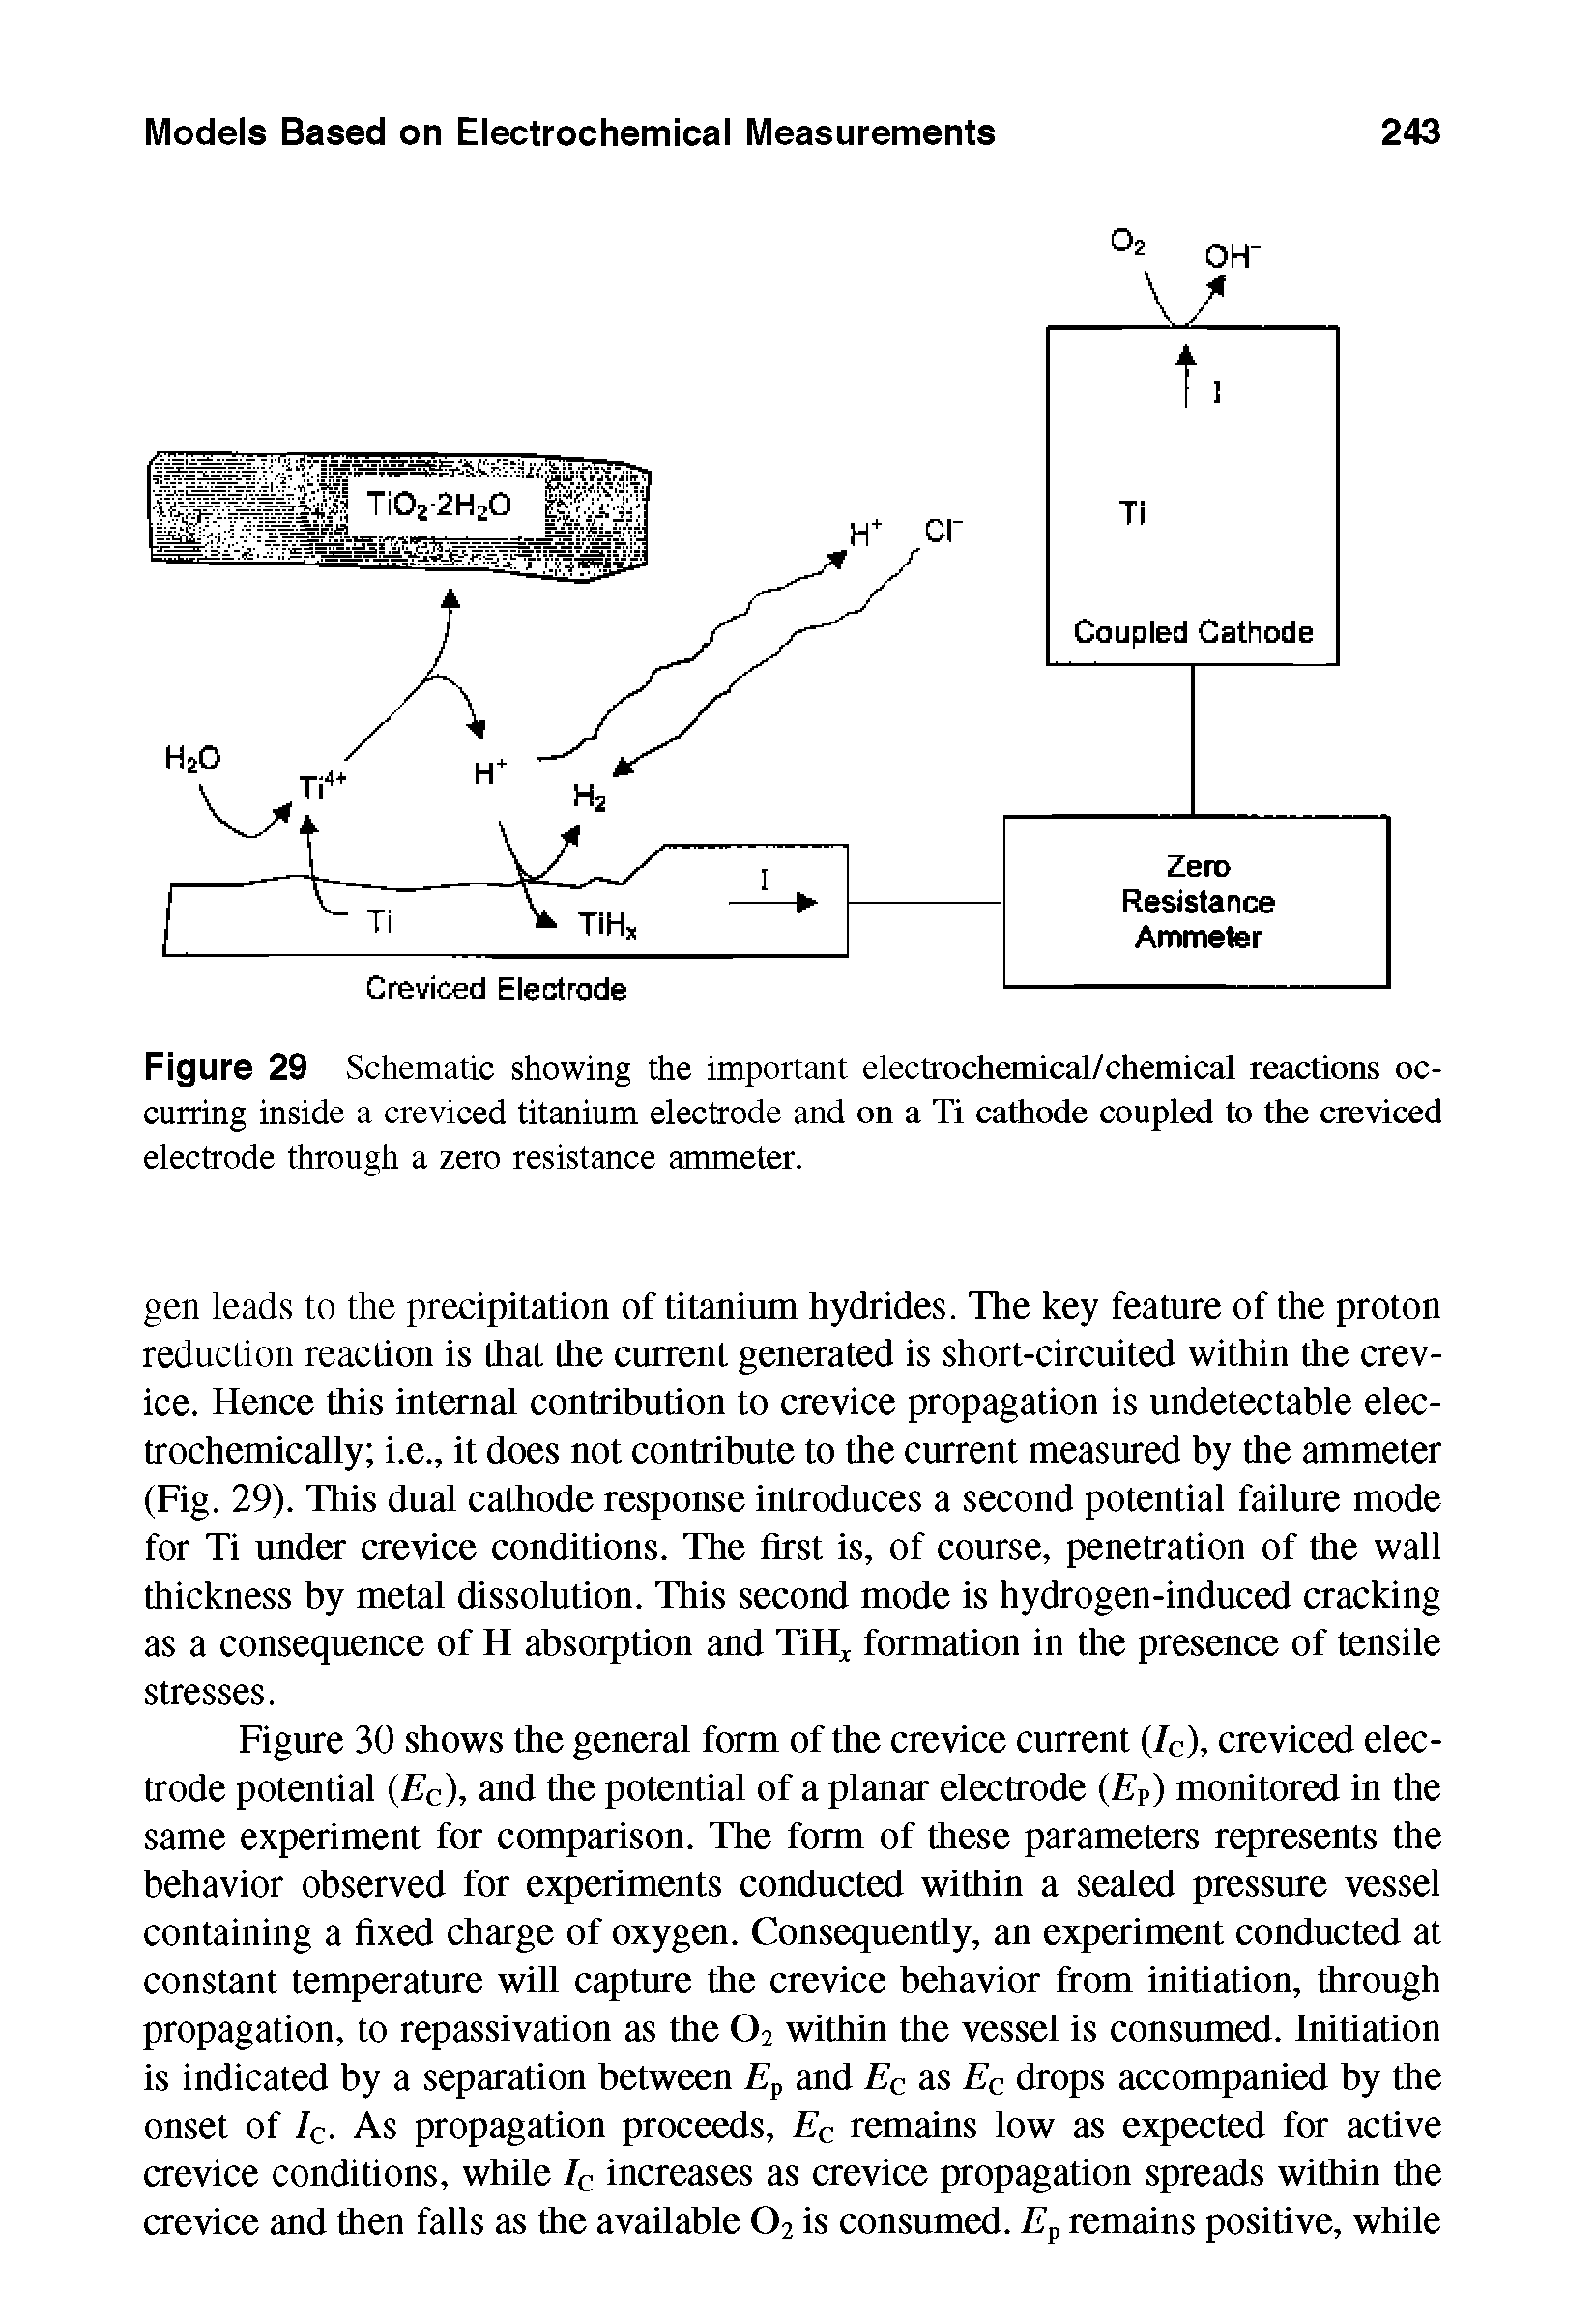 Figure 29 Schematic showing the important electrochemical/chemical reactions occurring inside a creviced titanium electrode and on a Ti cathode coupled to the creviced electrode through a zero resistance ammeter.